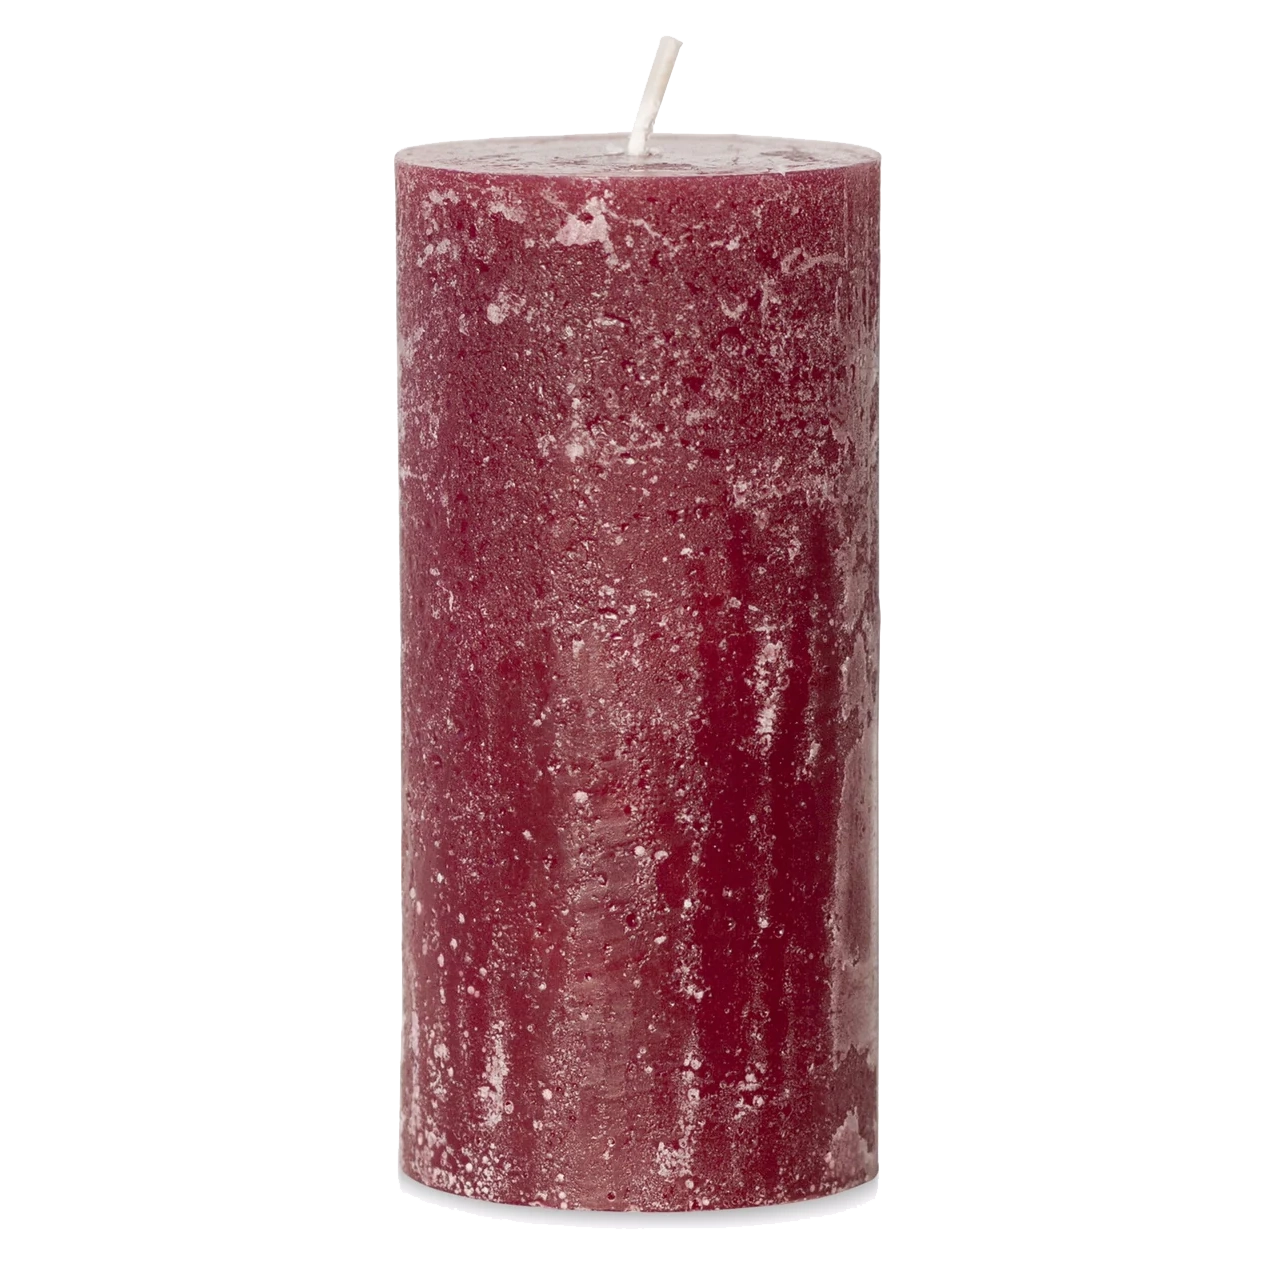 6 inch red pillar candle